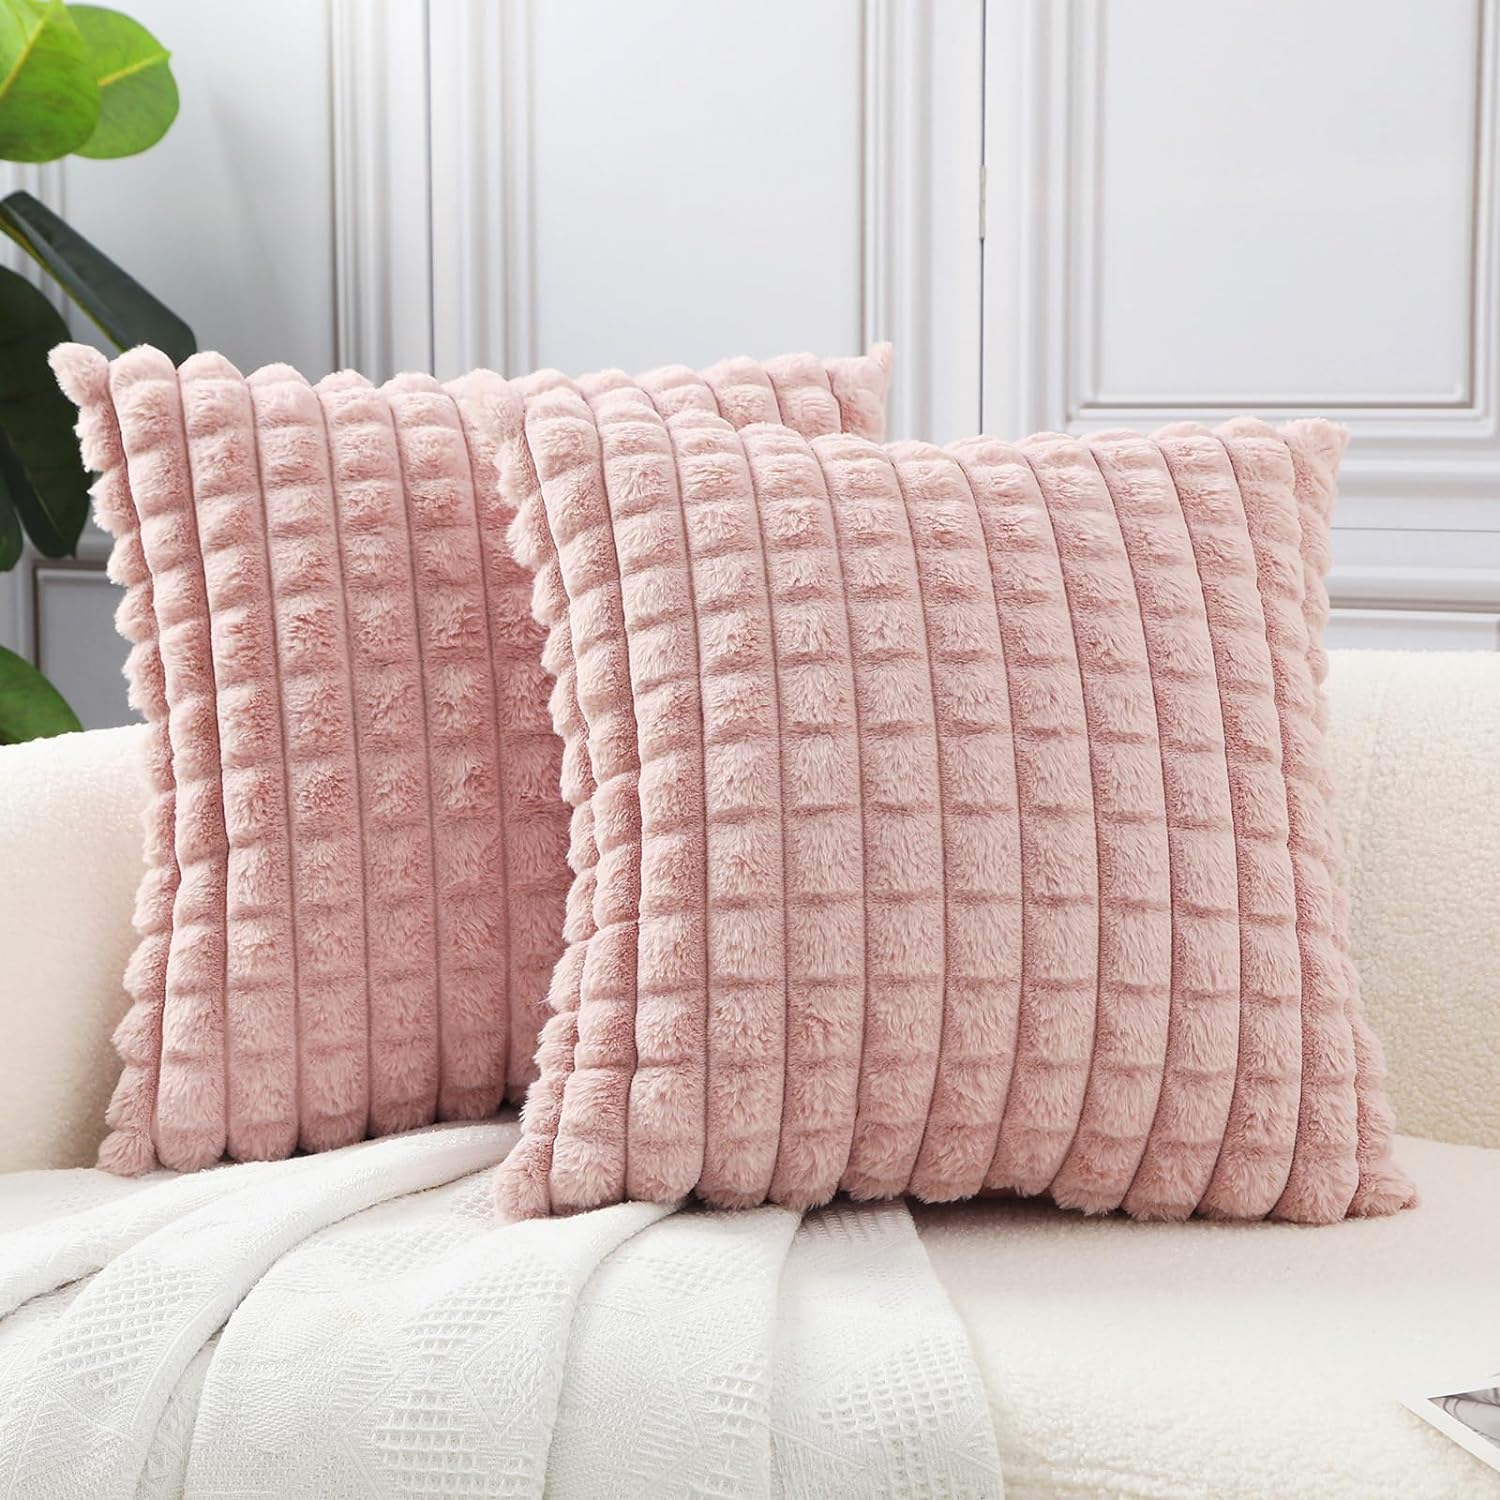 HPUK Faux Fur Plush Square Throw Pillow Covers 18x18 Inch, Decorative Fluffy Couch Pillow Covers for Living Room, Accent Cozy and Fuzzy Pillow Covers for Couch, Sofa, and Bedroom(Light Pink)